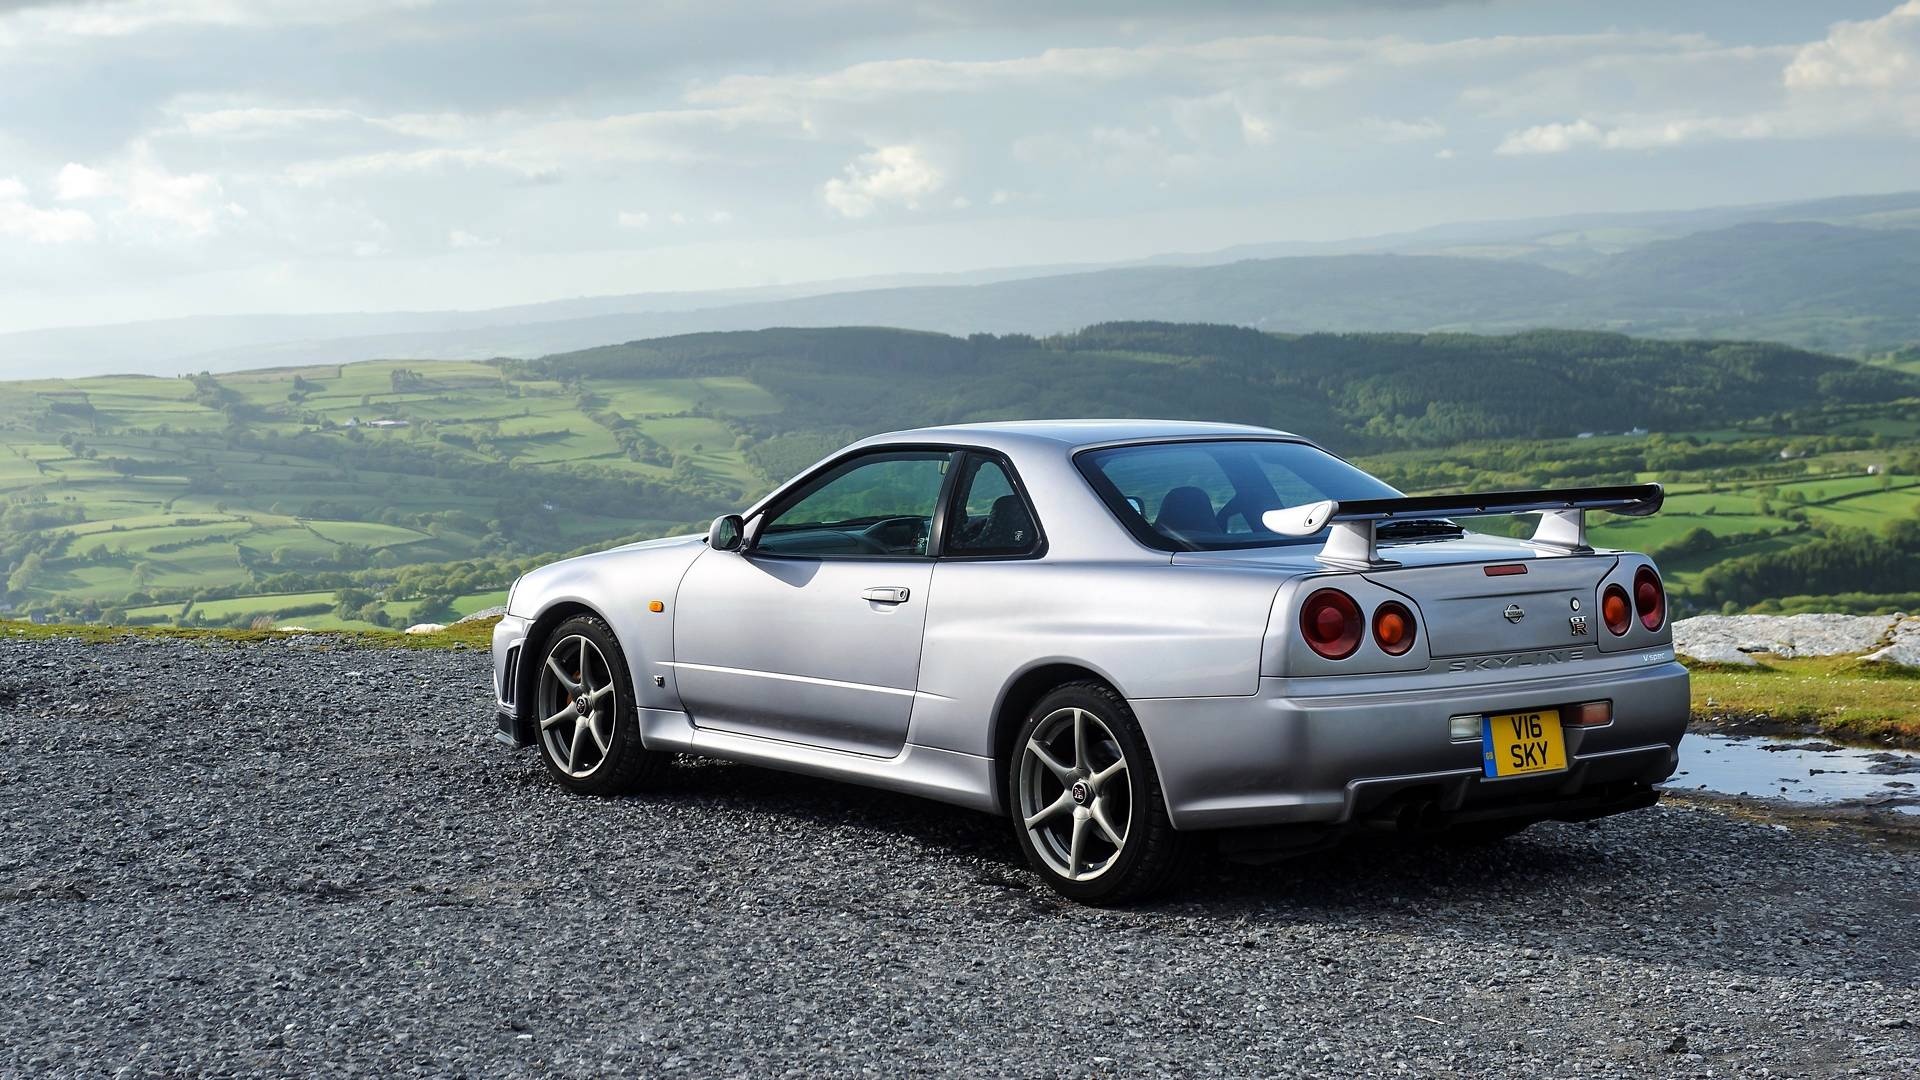 Nissan Skyline, In-depth guide, Performance features, Must-know information, 1920x1080 Full HD Desktop